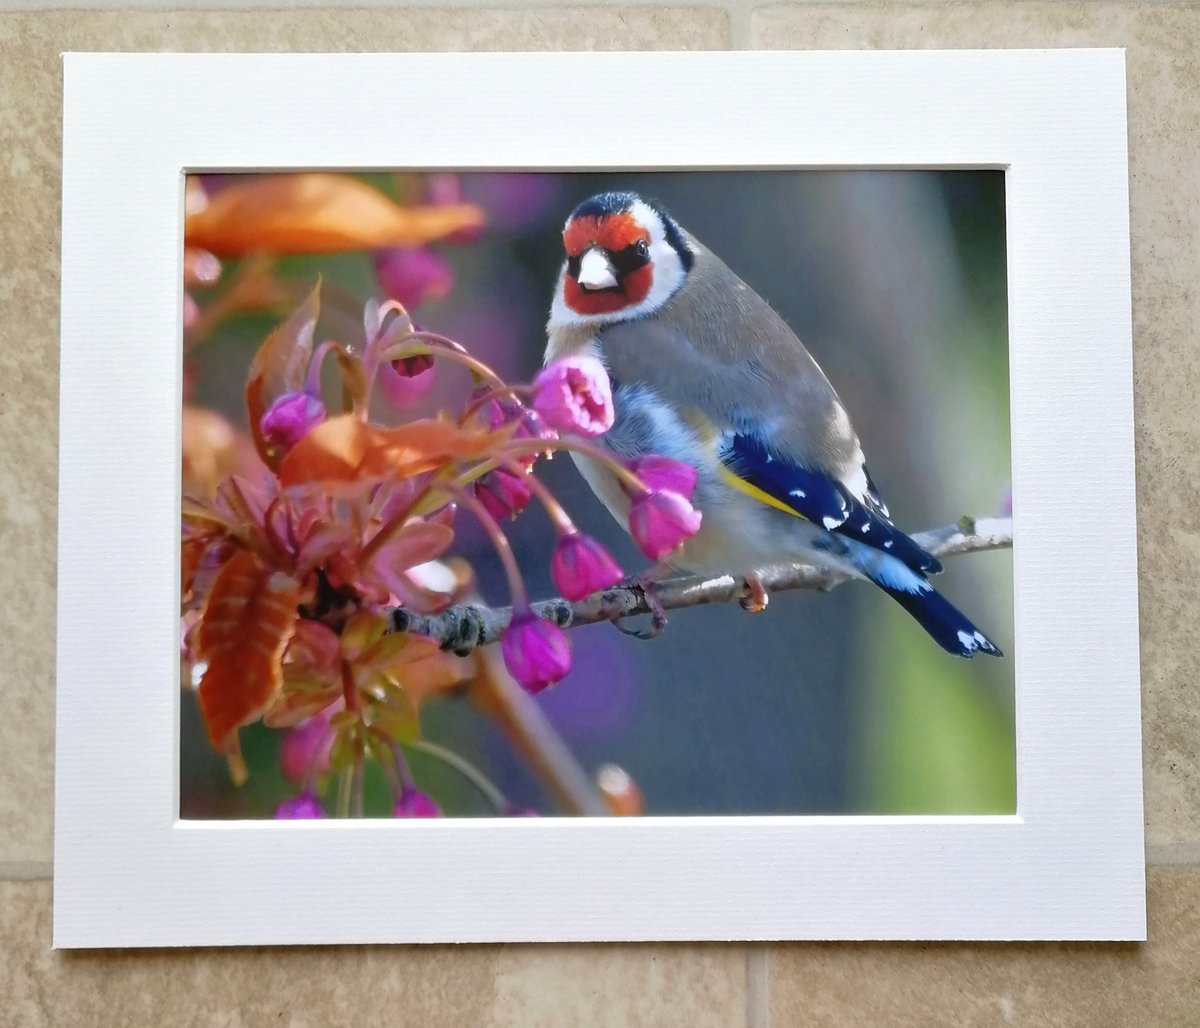 'Goldfinch in Cherry Blossom' - 10x8 mounted print.  You can buy it here; https://www.carlbovis.com/product-page/goldfinch-in-cherry-blossom-10x8-mounted-print 